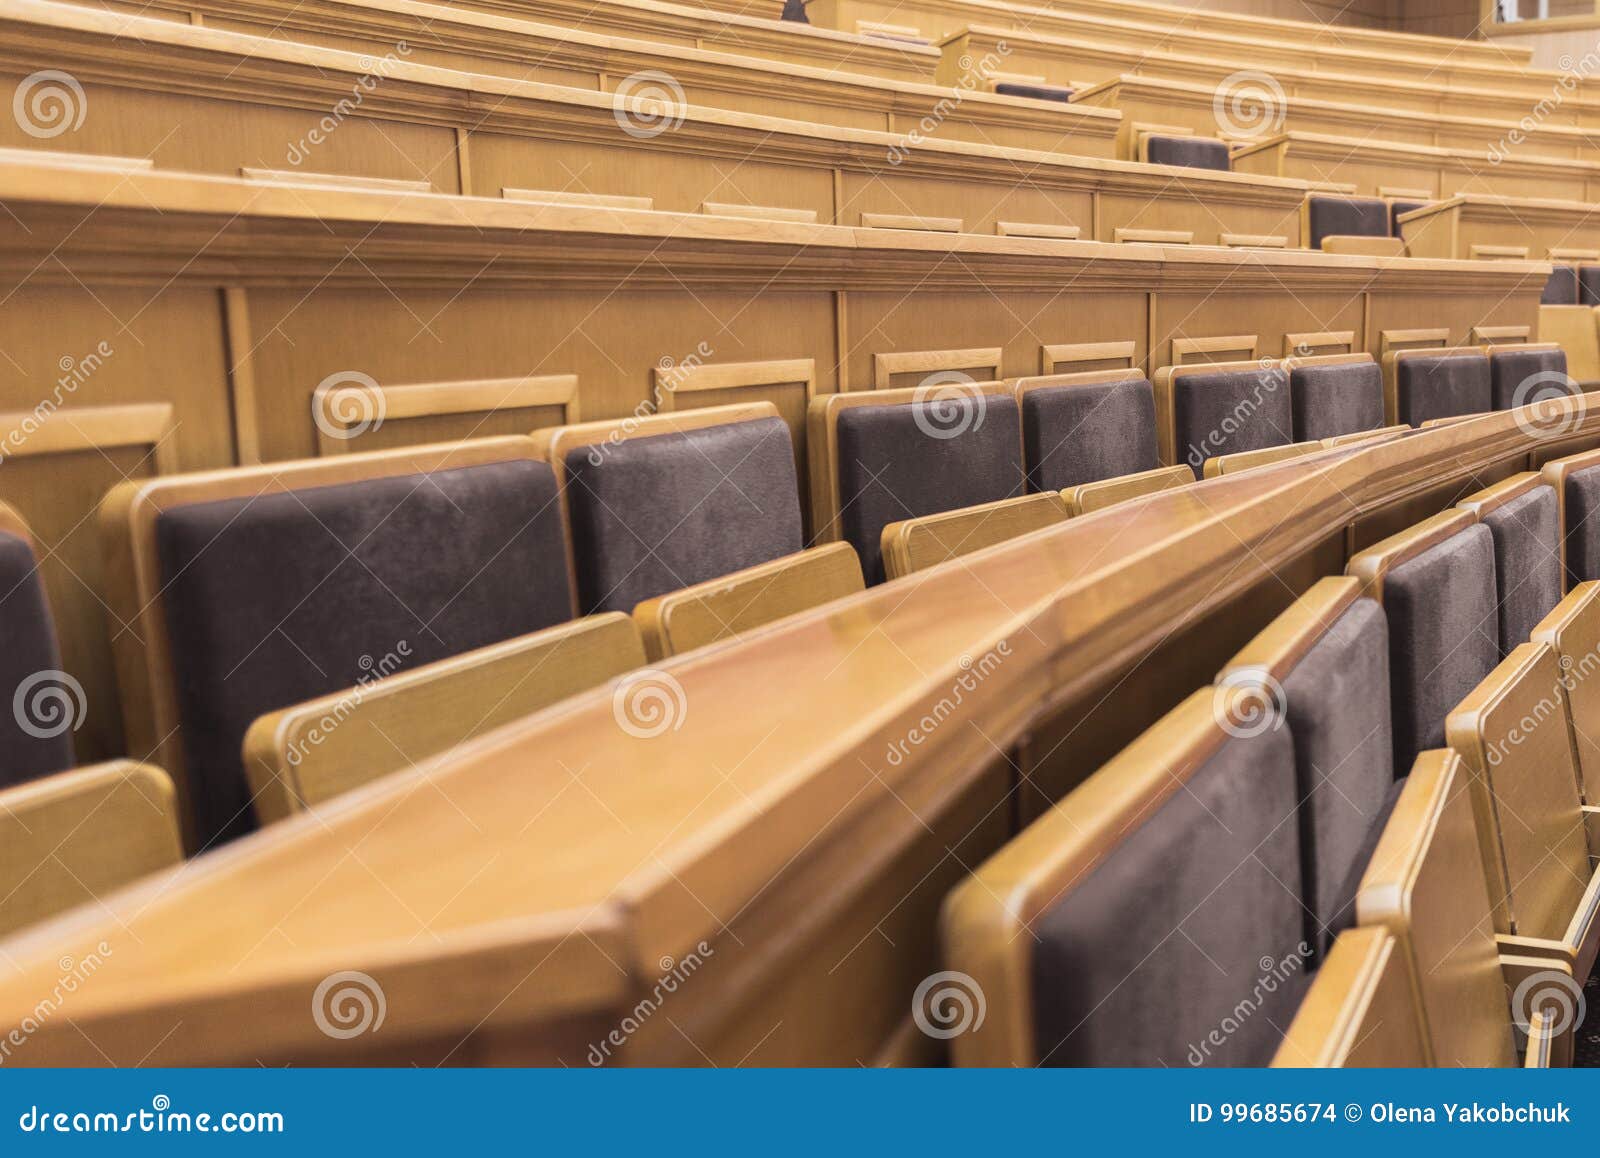 Wooden Desks With Chairs In Lecture Hall Stock Photo Image Of